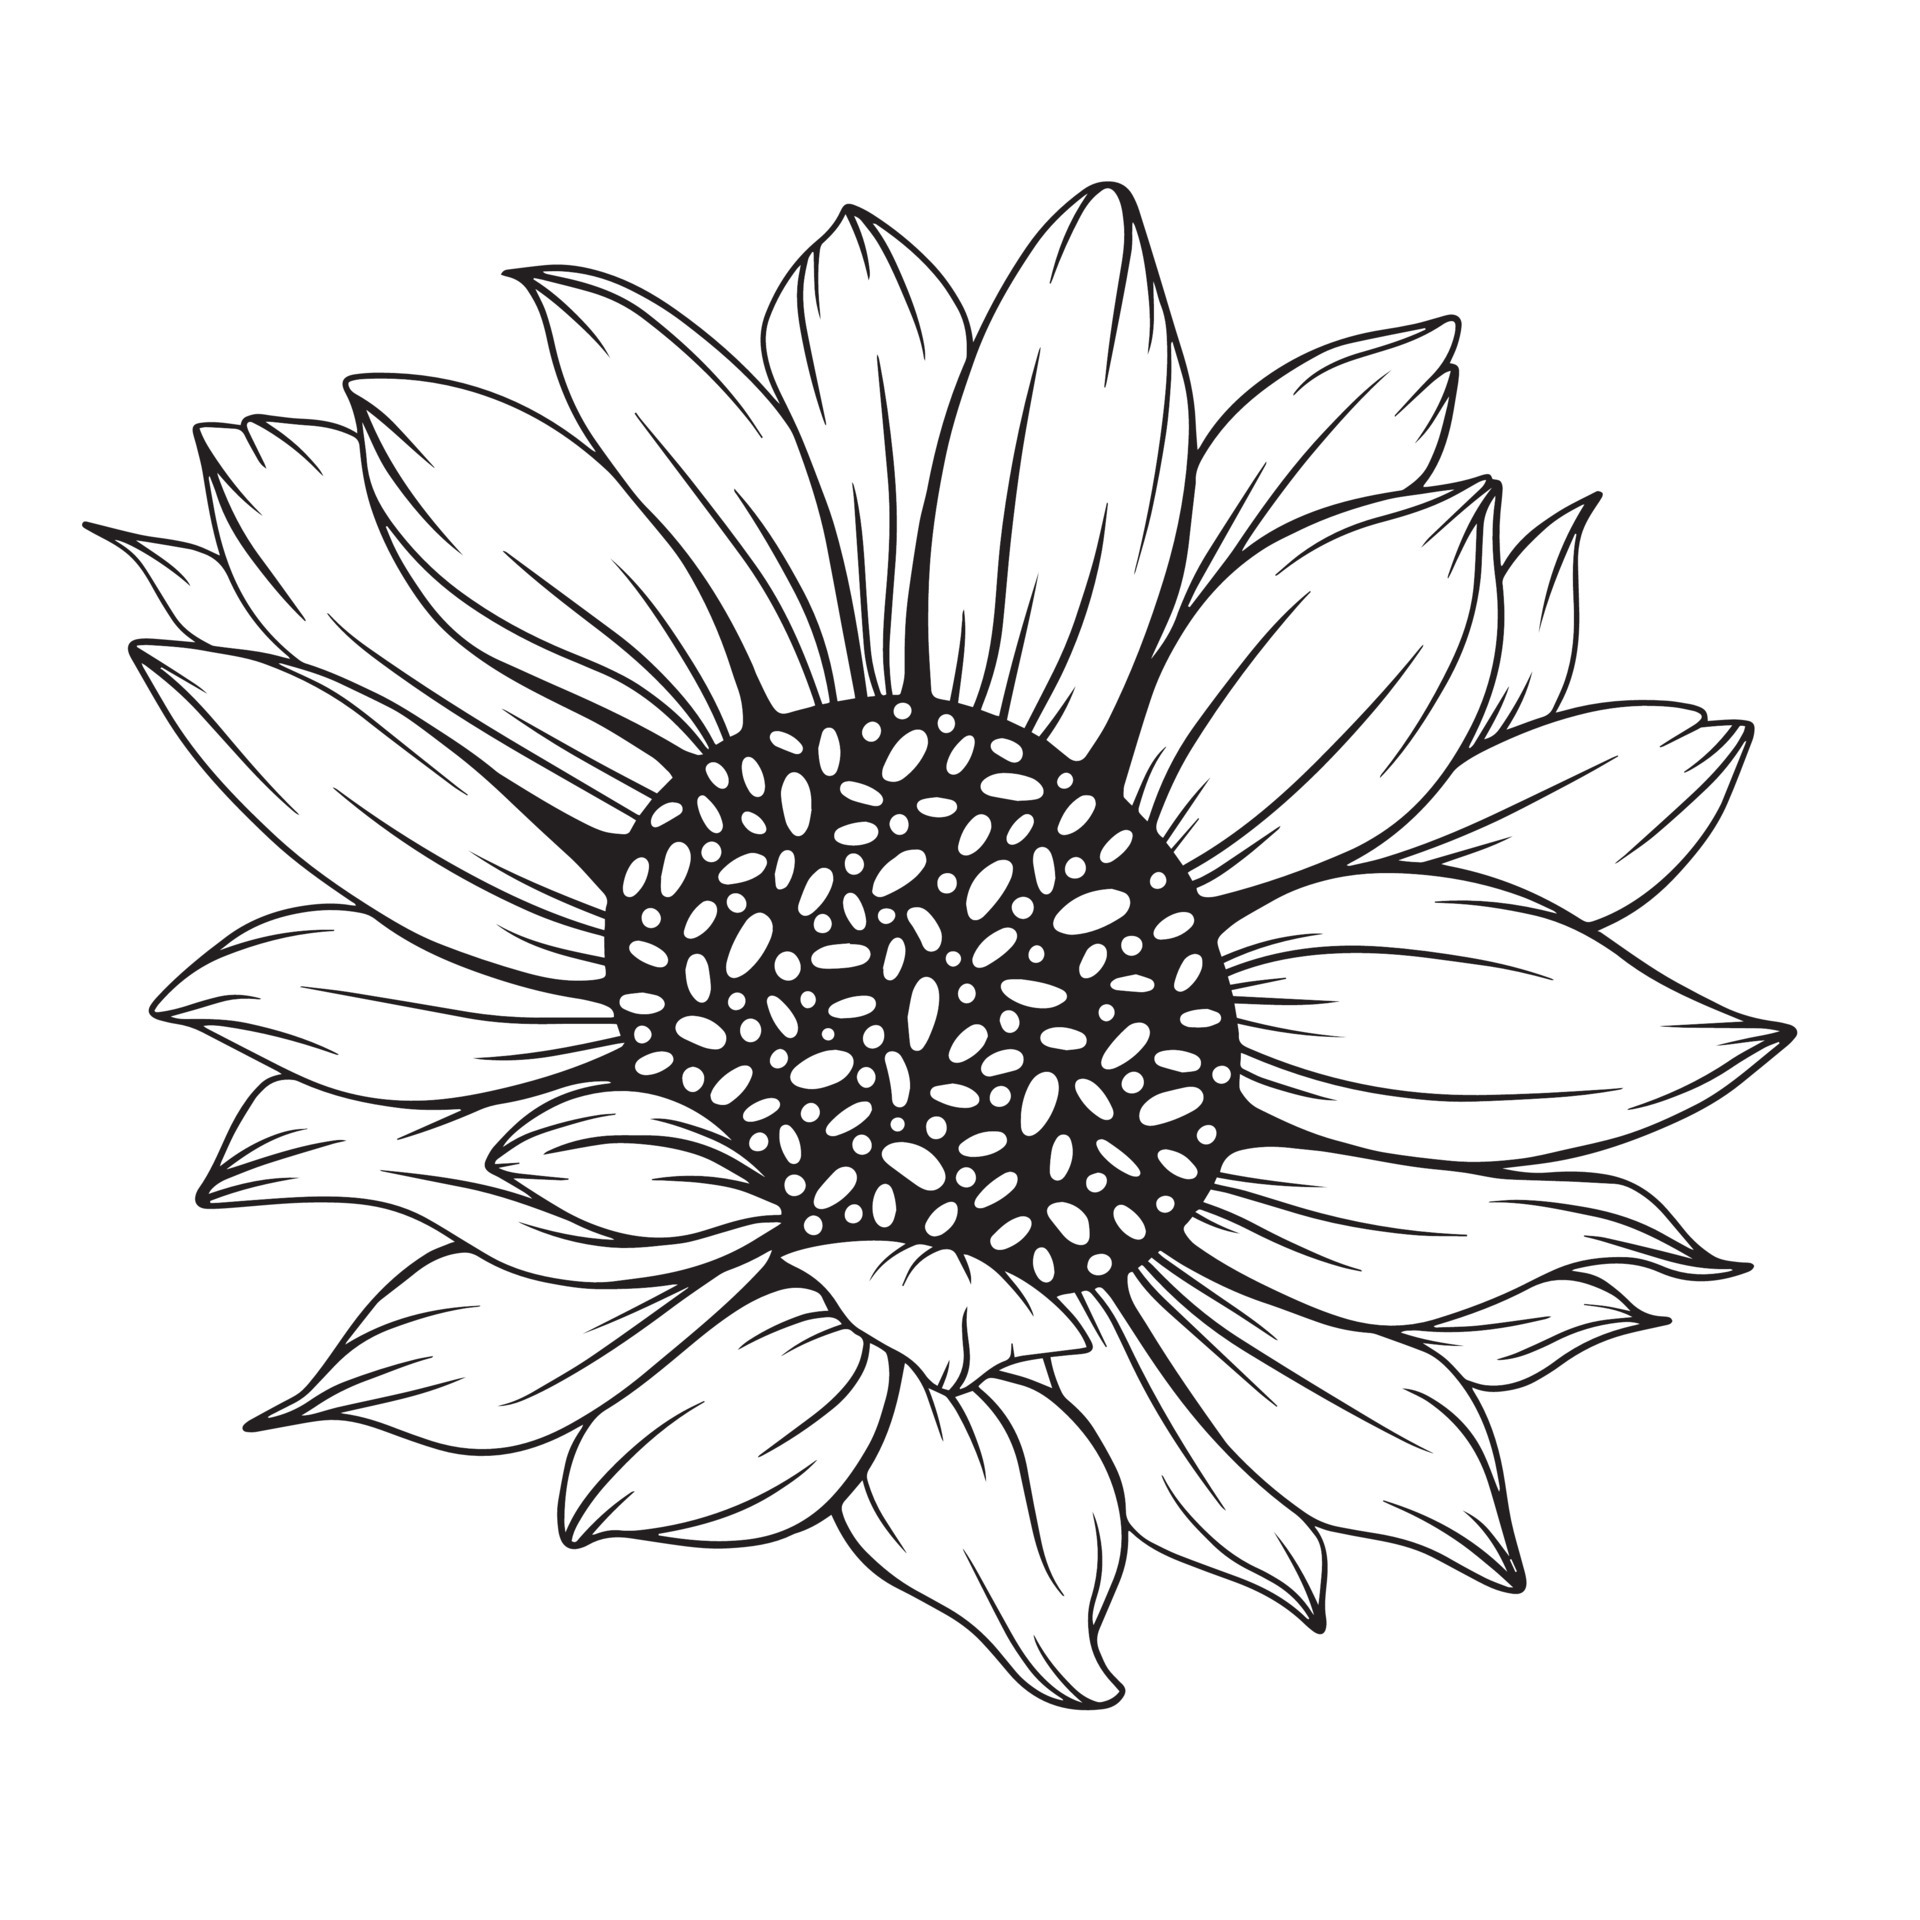 Sunflower Sketch Vector Seeds Blooming Flowers Collection Stock  Illustration - Download Image Now - iStock